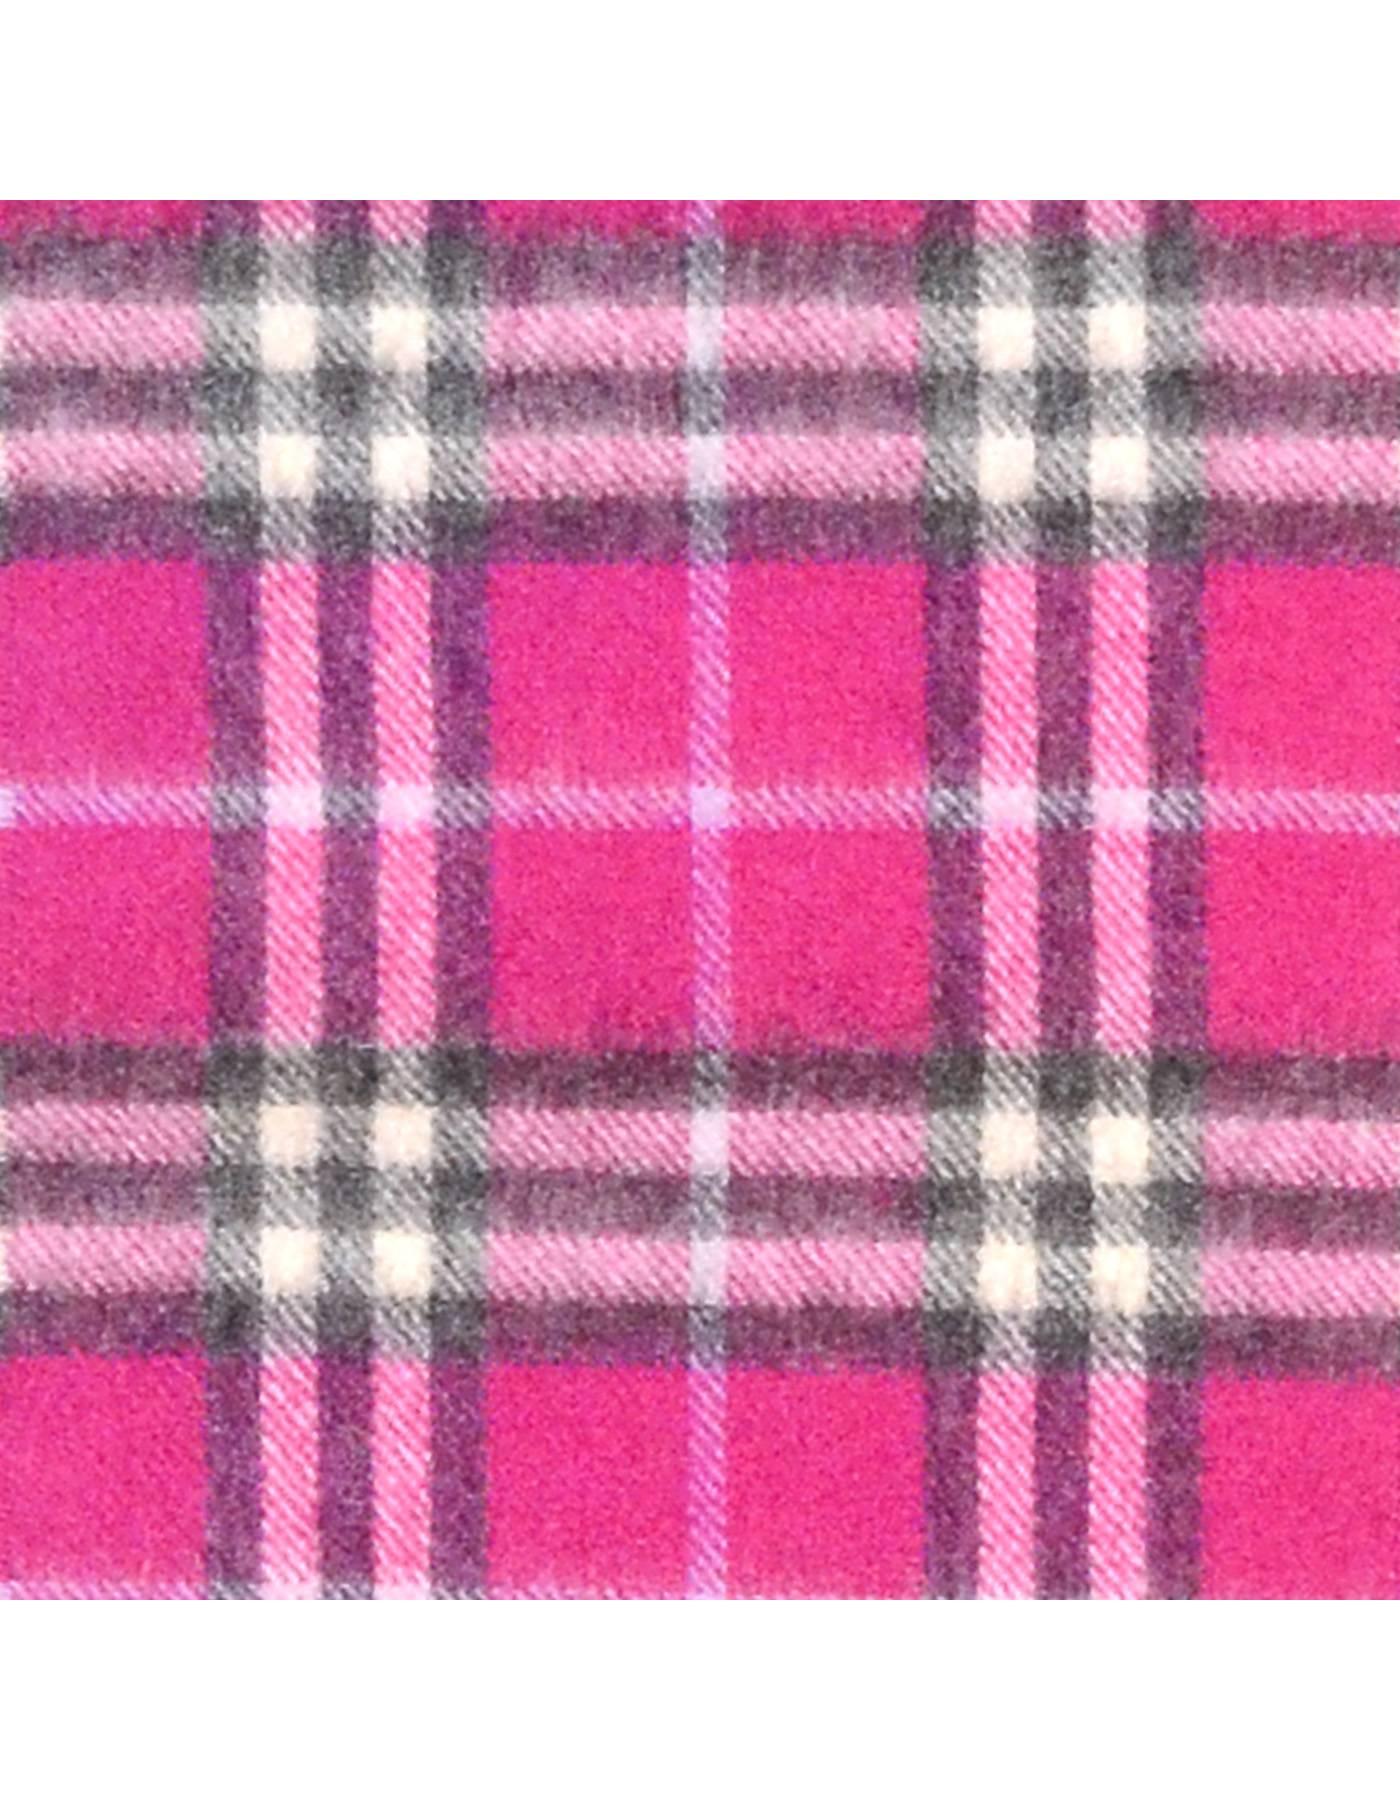 Burberry Pink Cashmere Nova Check Scarf

Made In: England
Color: Pink
Composition: 100% Cashmere
Overall Condition: Excellent pre-owned condition, gentle wear to fabric

Measurements:
Length: 50"
Width: 8"